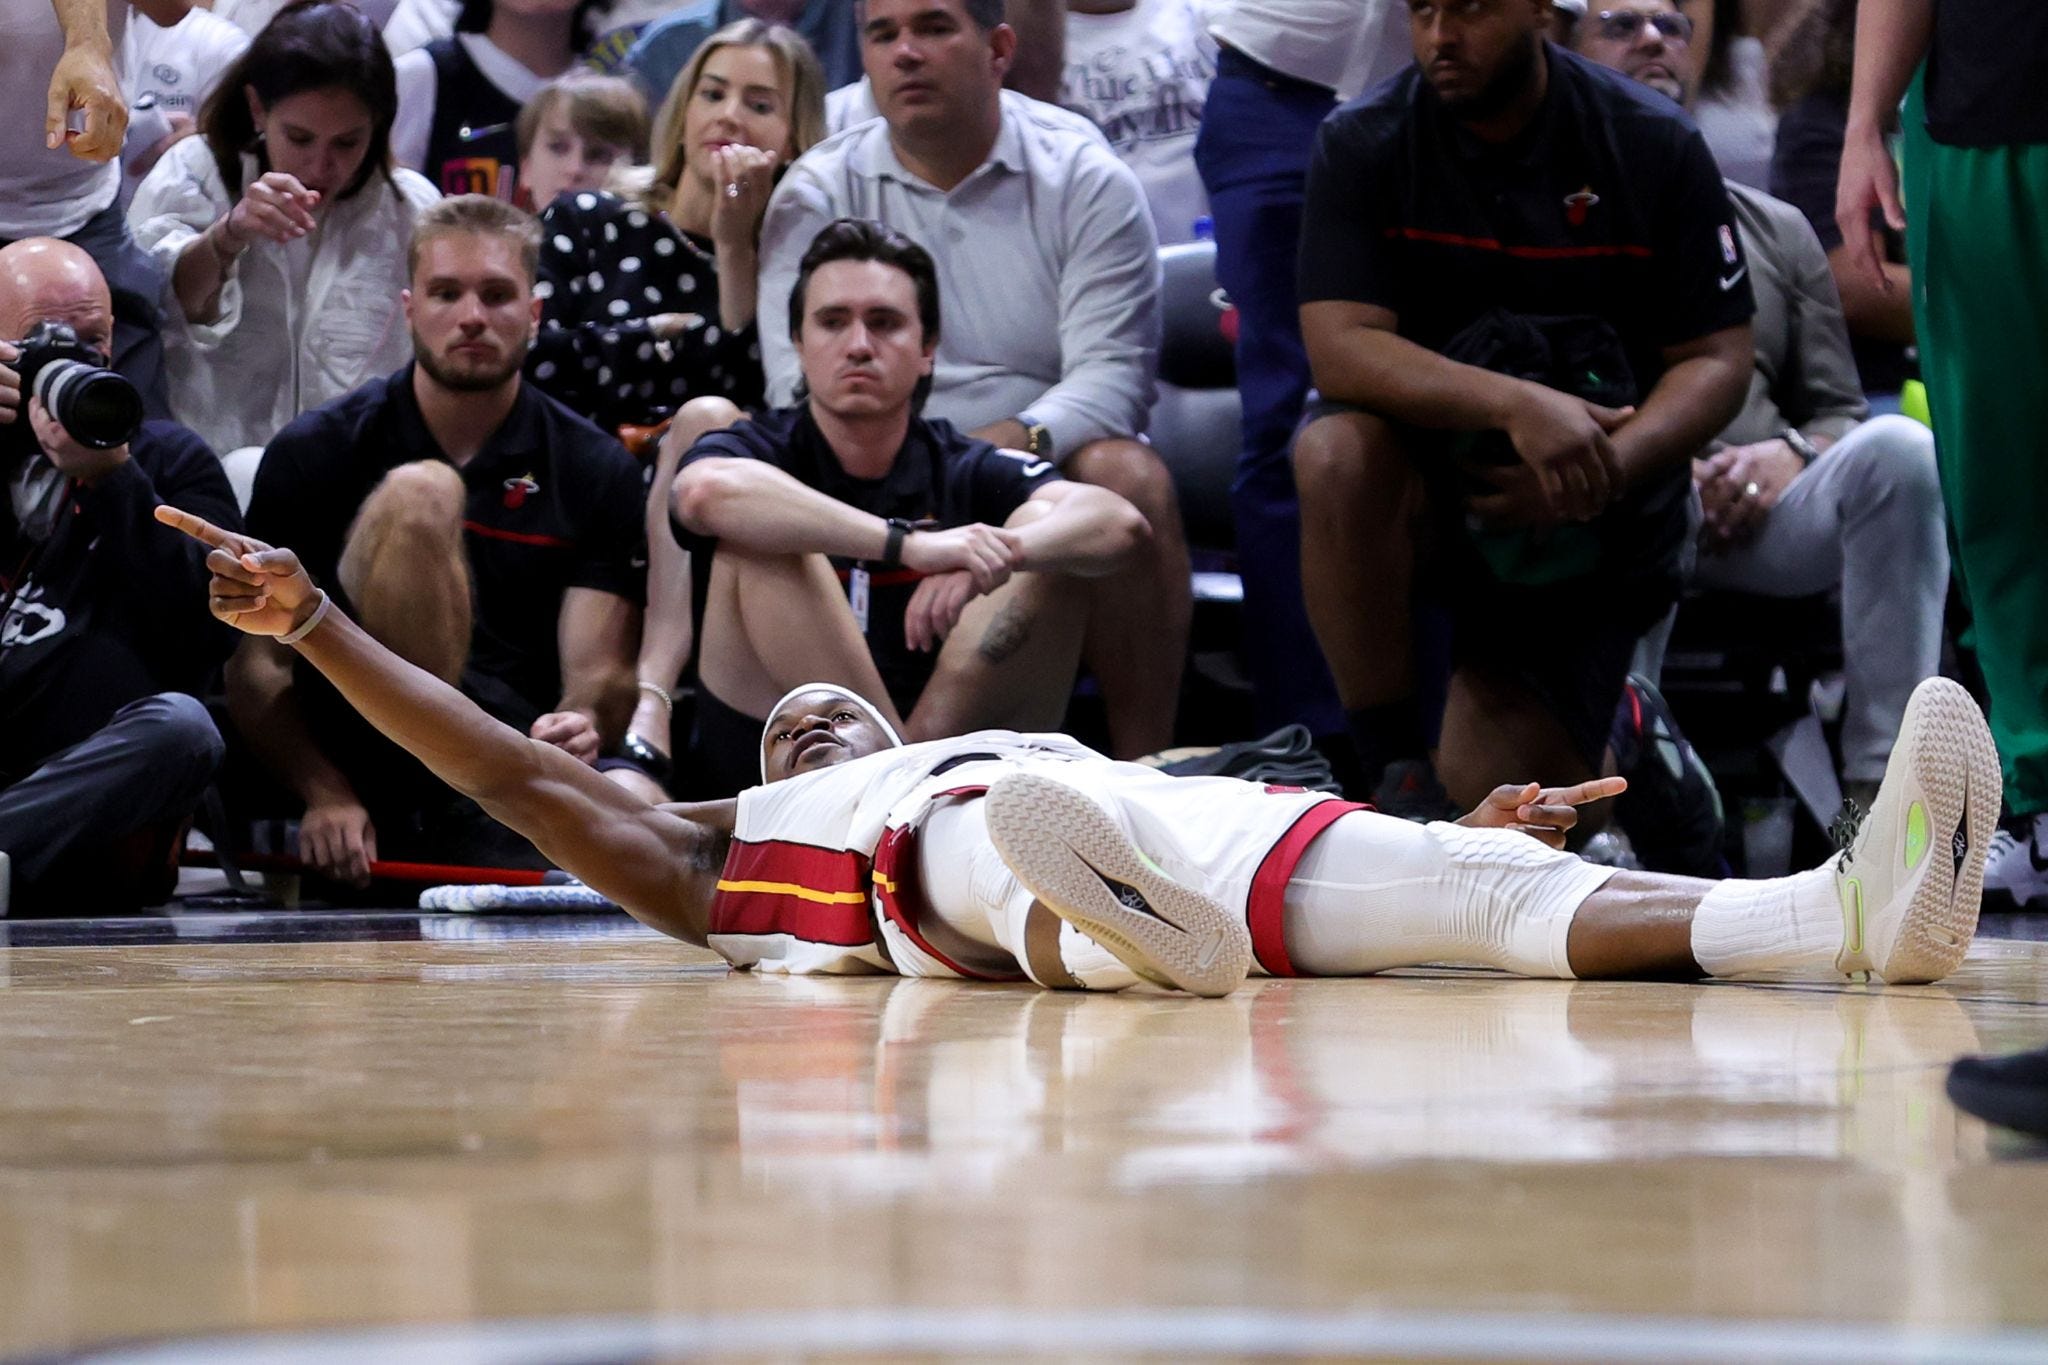 Miami Heat: 3 big questions facing the team after losing in ECF